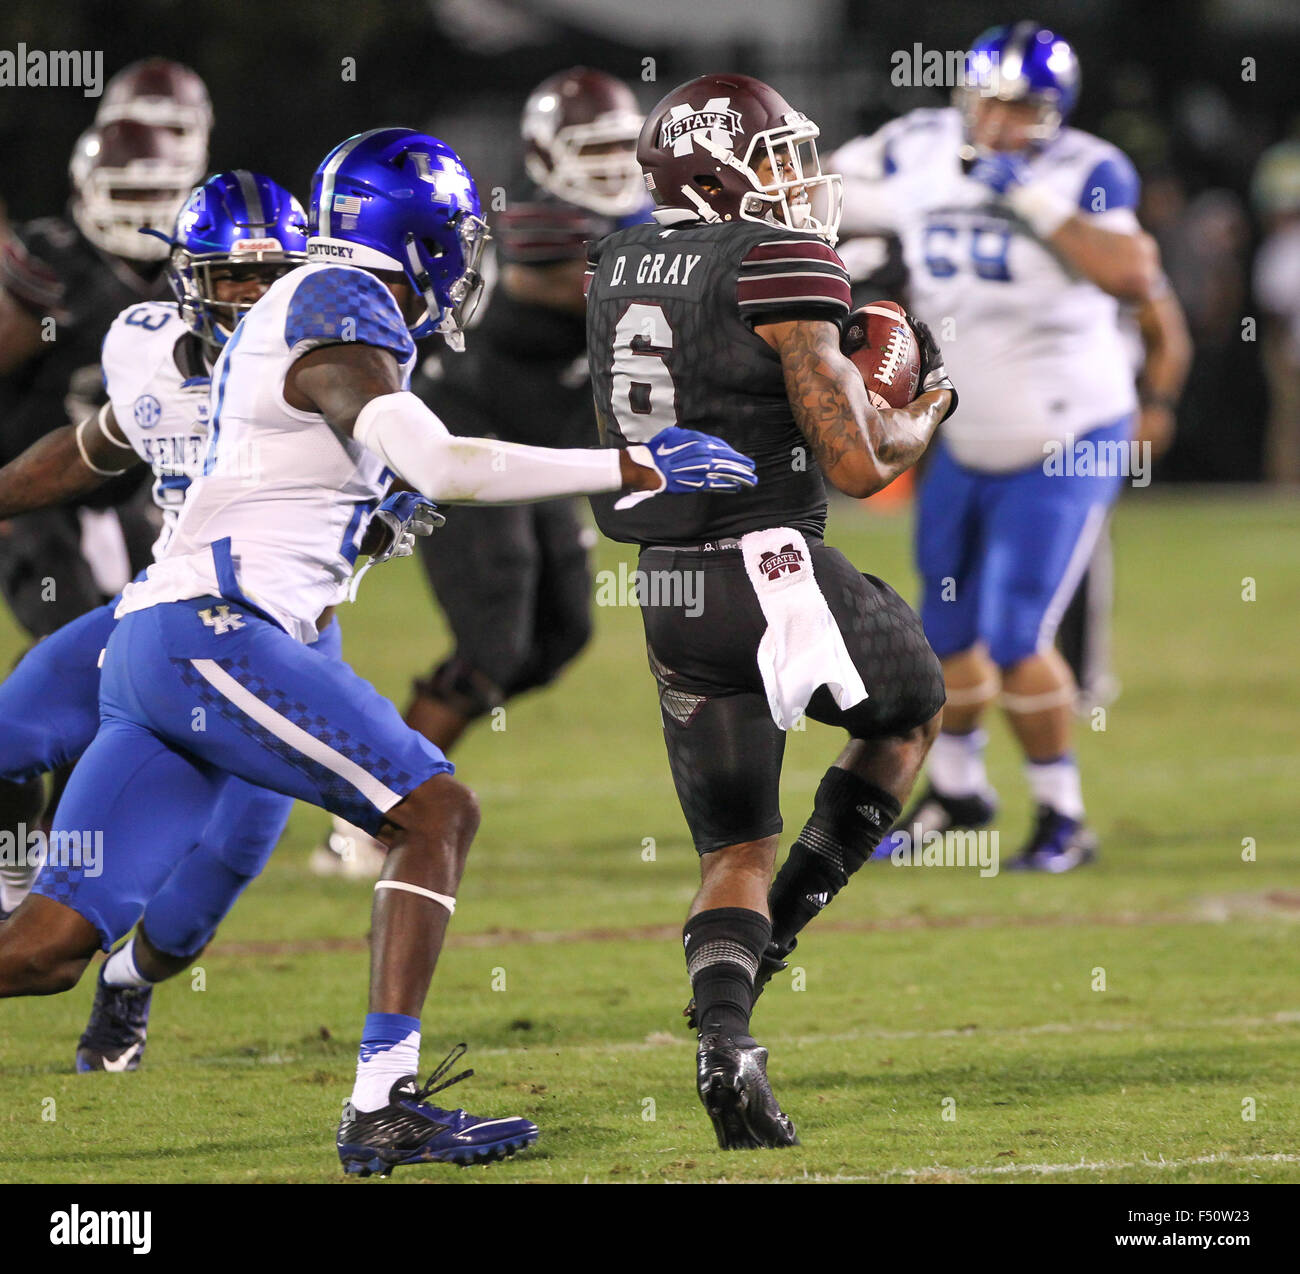 Starkville, MS, USA. 24th Oct, 2015. Mississippi State Bulldogs wide receiver Donald Gray (6) catches a pass over the middle during the NCAA Football game between the Mississippi State Bulldogs and the Kentucky Wildcats at Davis Wade Stadium in Starkville, MS. Chuck Lick/CSM/Alamy Live News Stock Photo